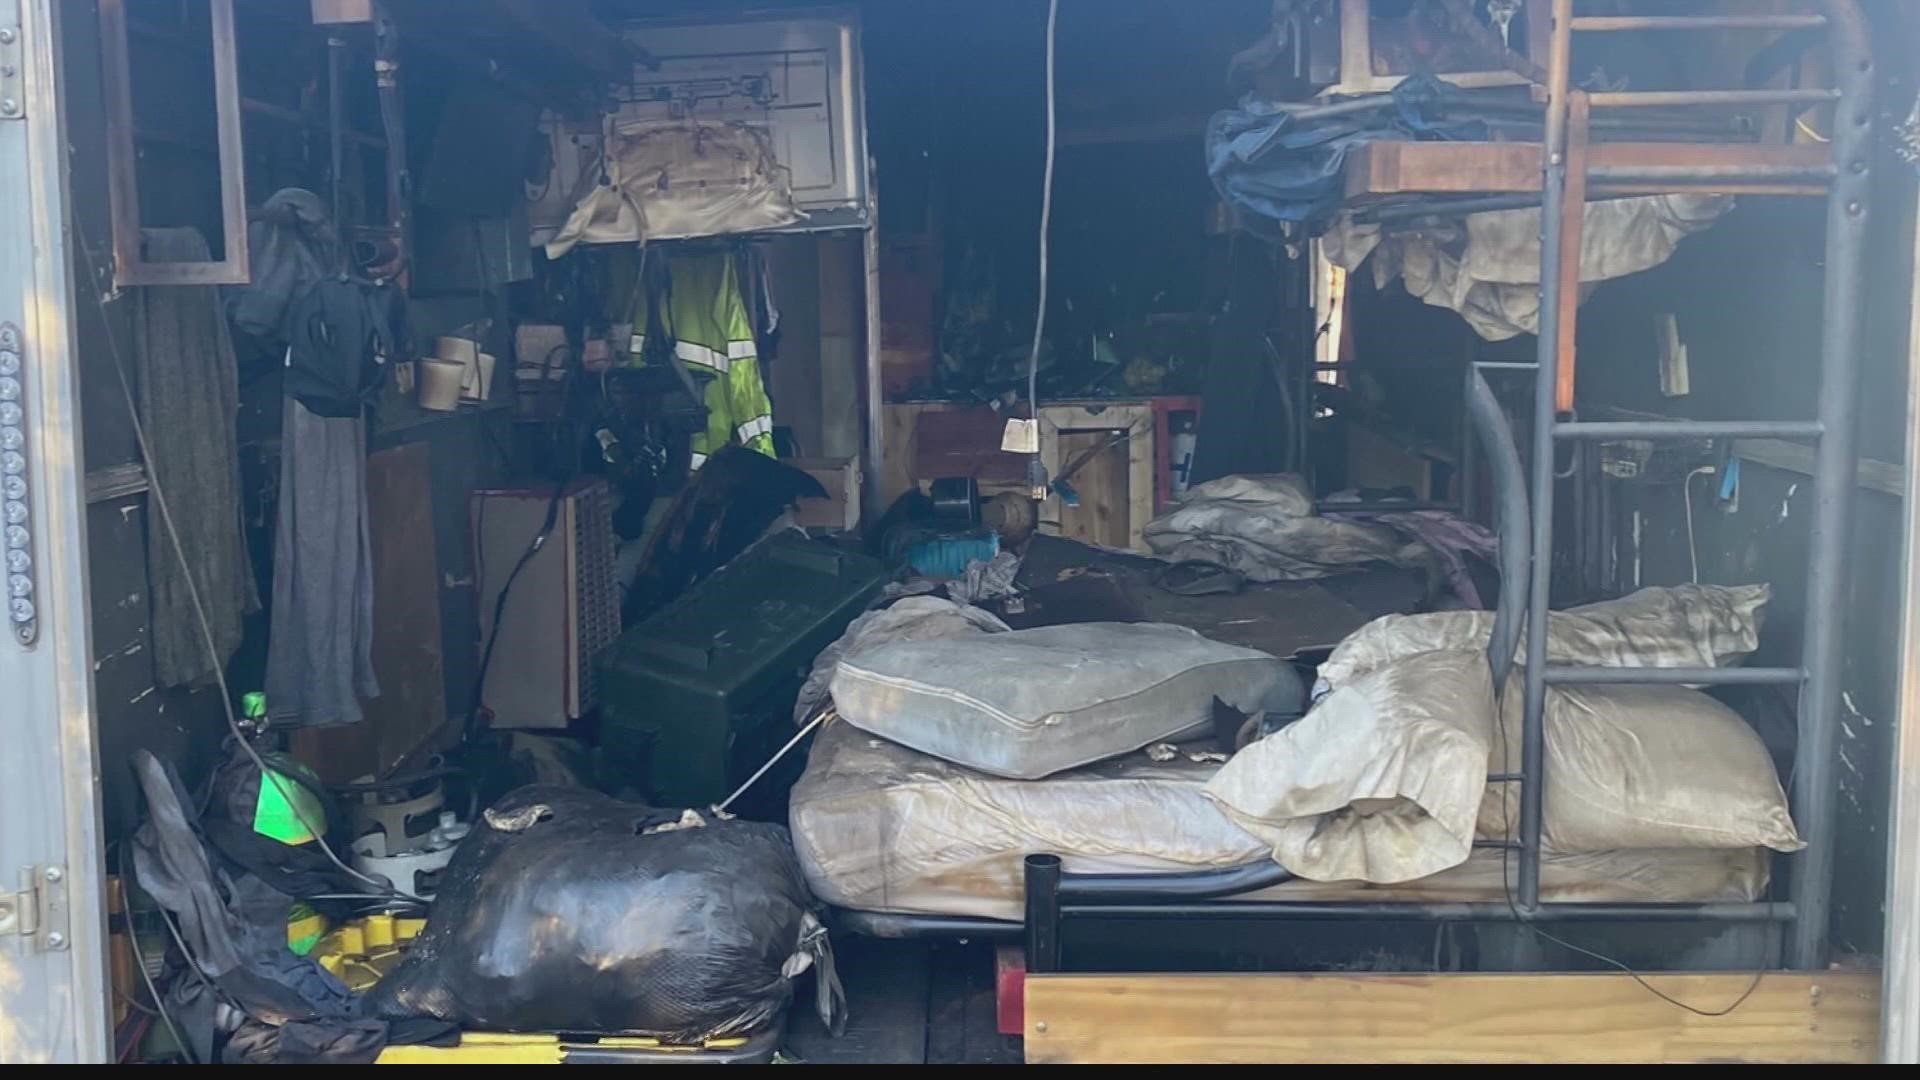 A wildland firefighter deployed to help battle the Pipeline Fire loses it all after a fire destroys his trailer home and kills his two dogs inside.